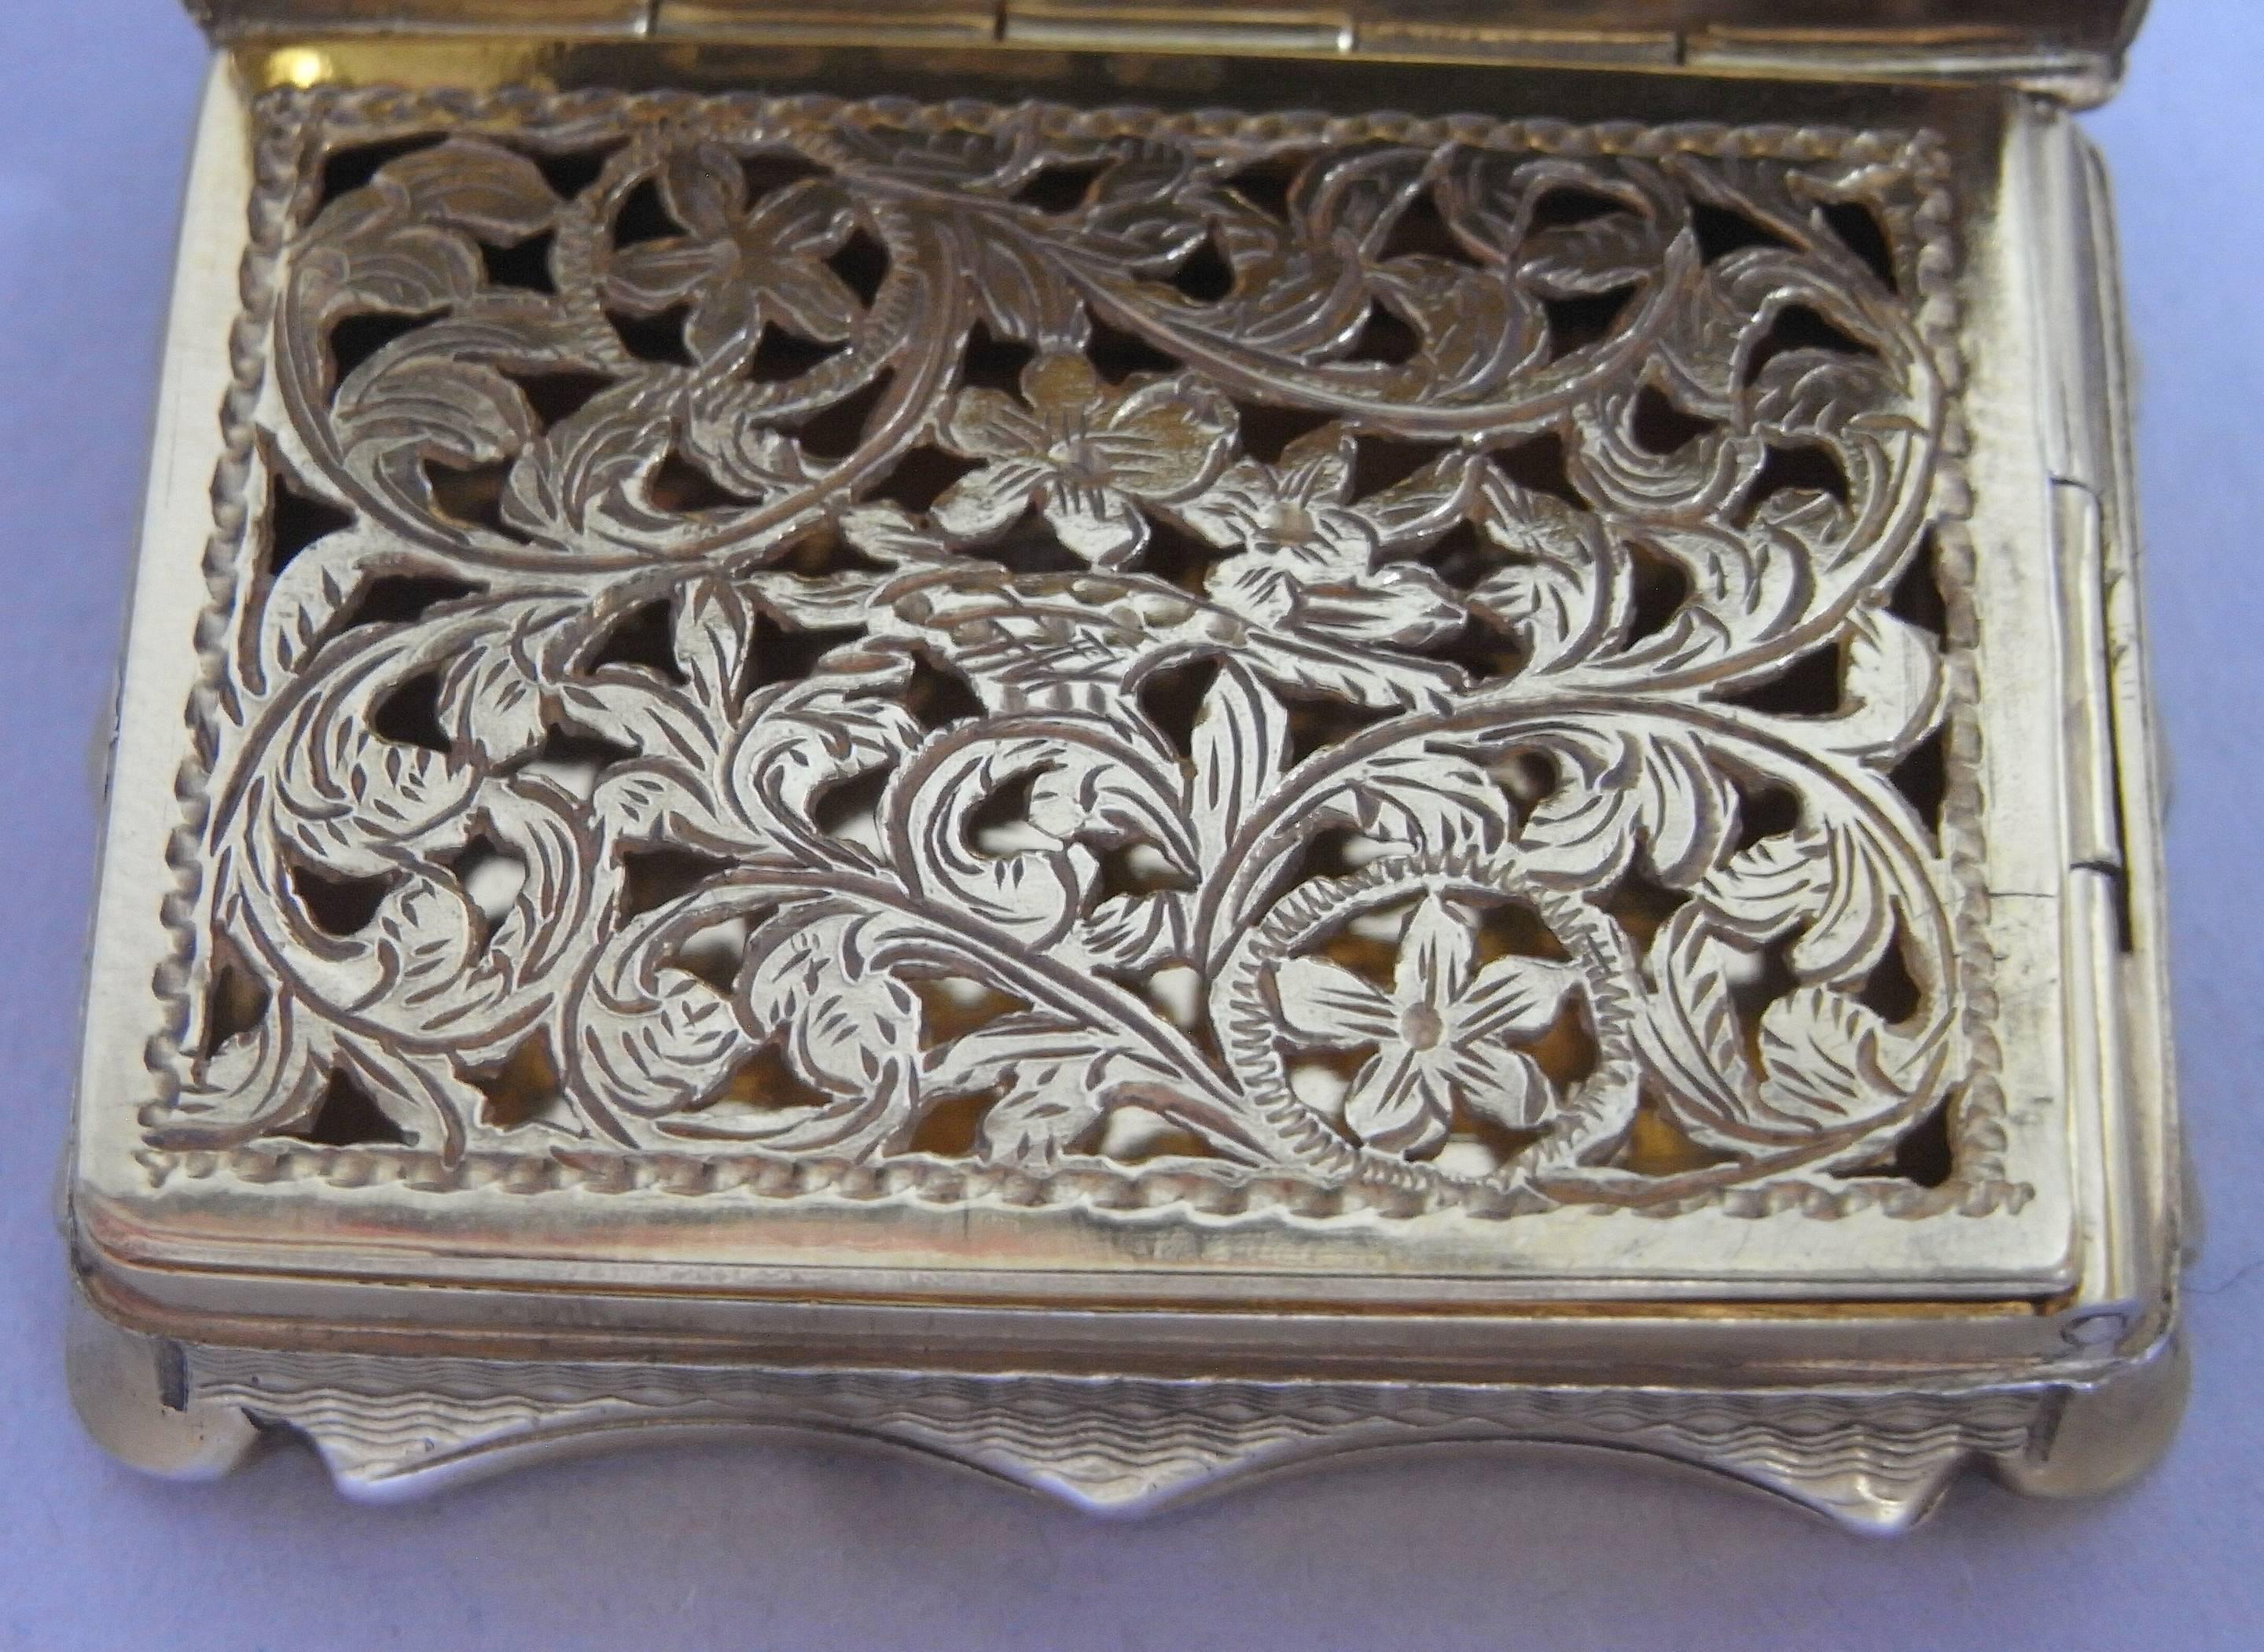 This very rare silver gilt Vinaigrette is broad rectangular in form with serpentine shaped sides engraved with a scroll work frame. The cover depicts a detailed view of Salisbury Cathedral, a very rare view to find on a Vinaigrette. The sides and